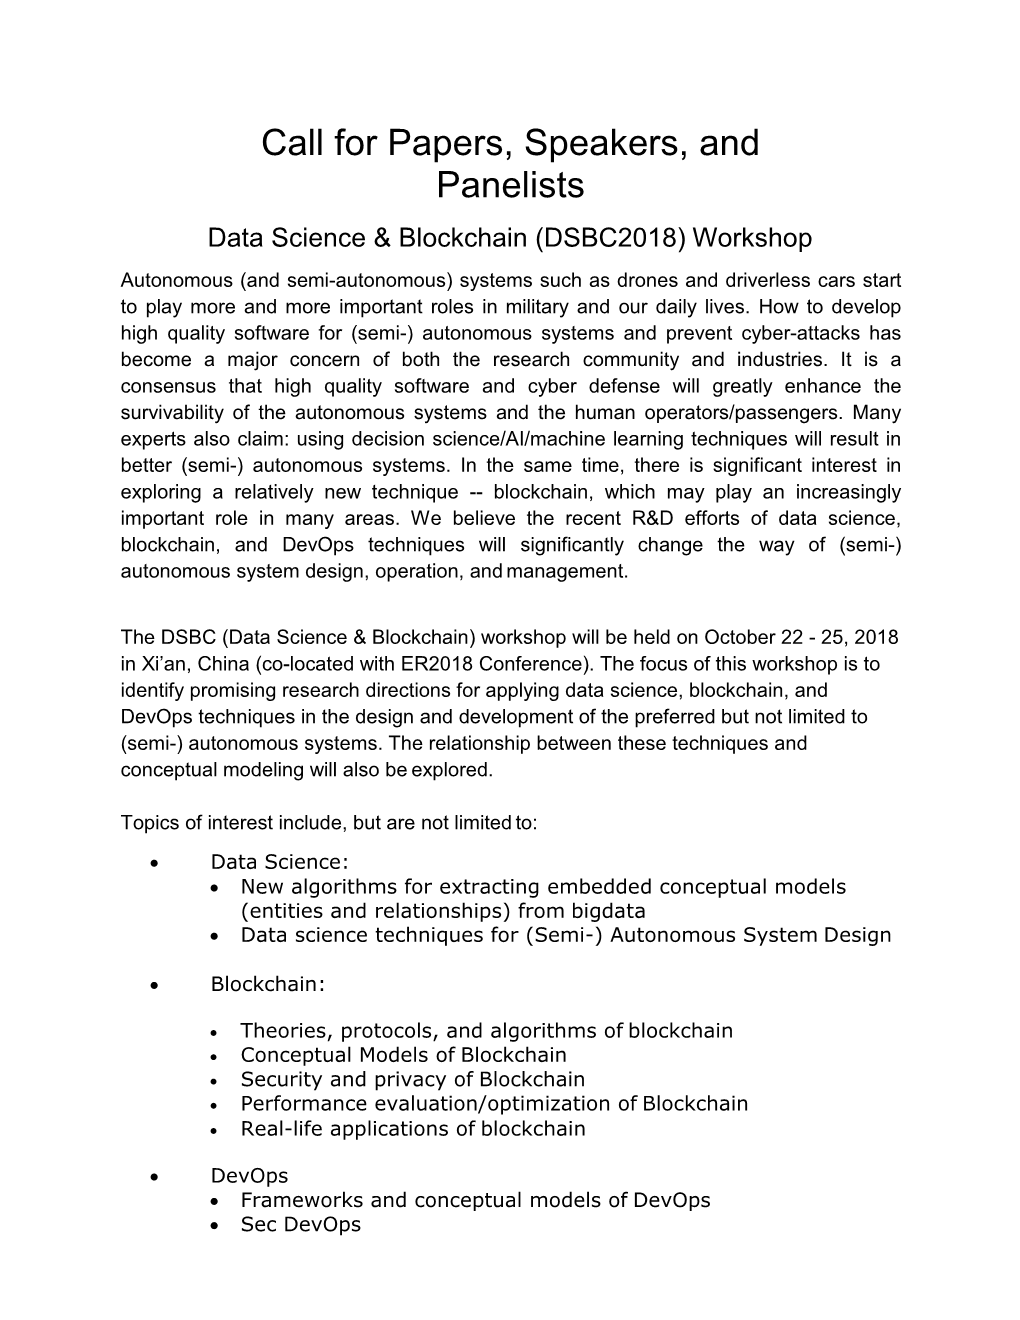 Call for Papers, Speakers, and Panelists